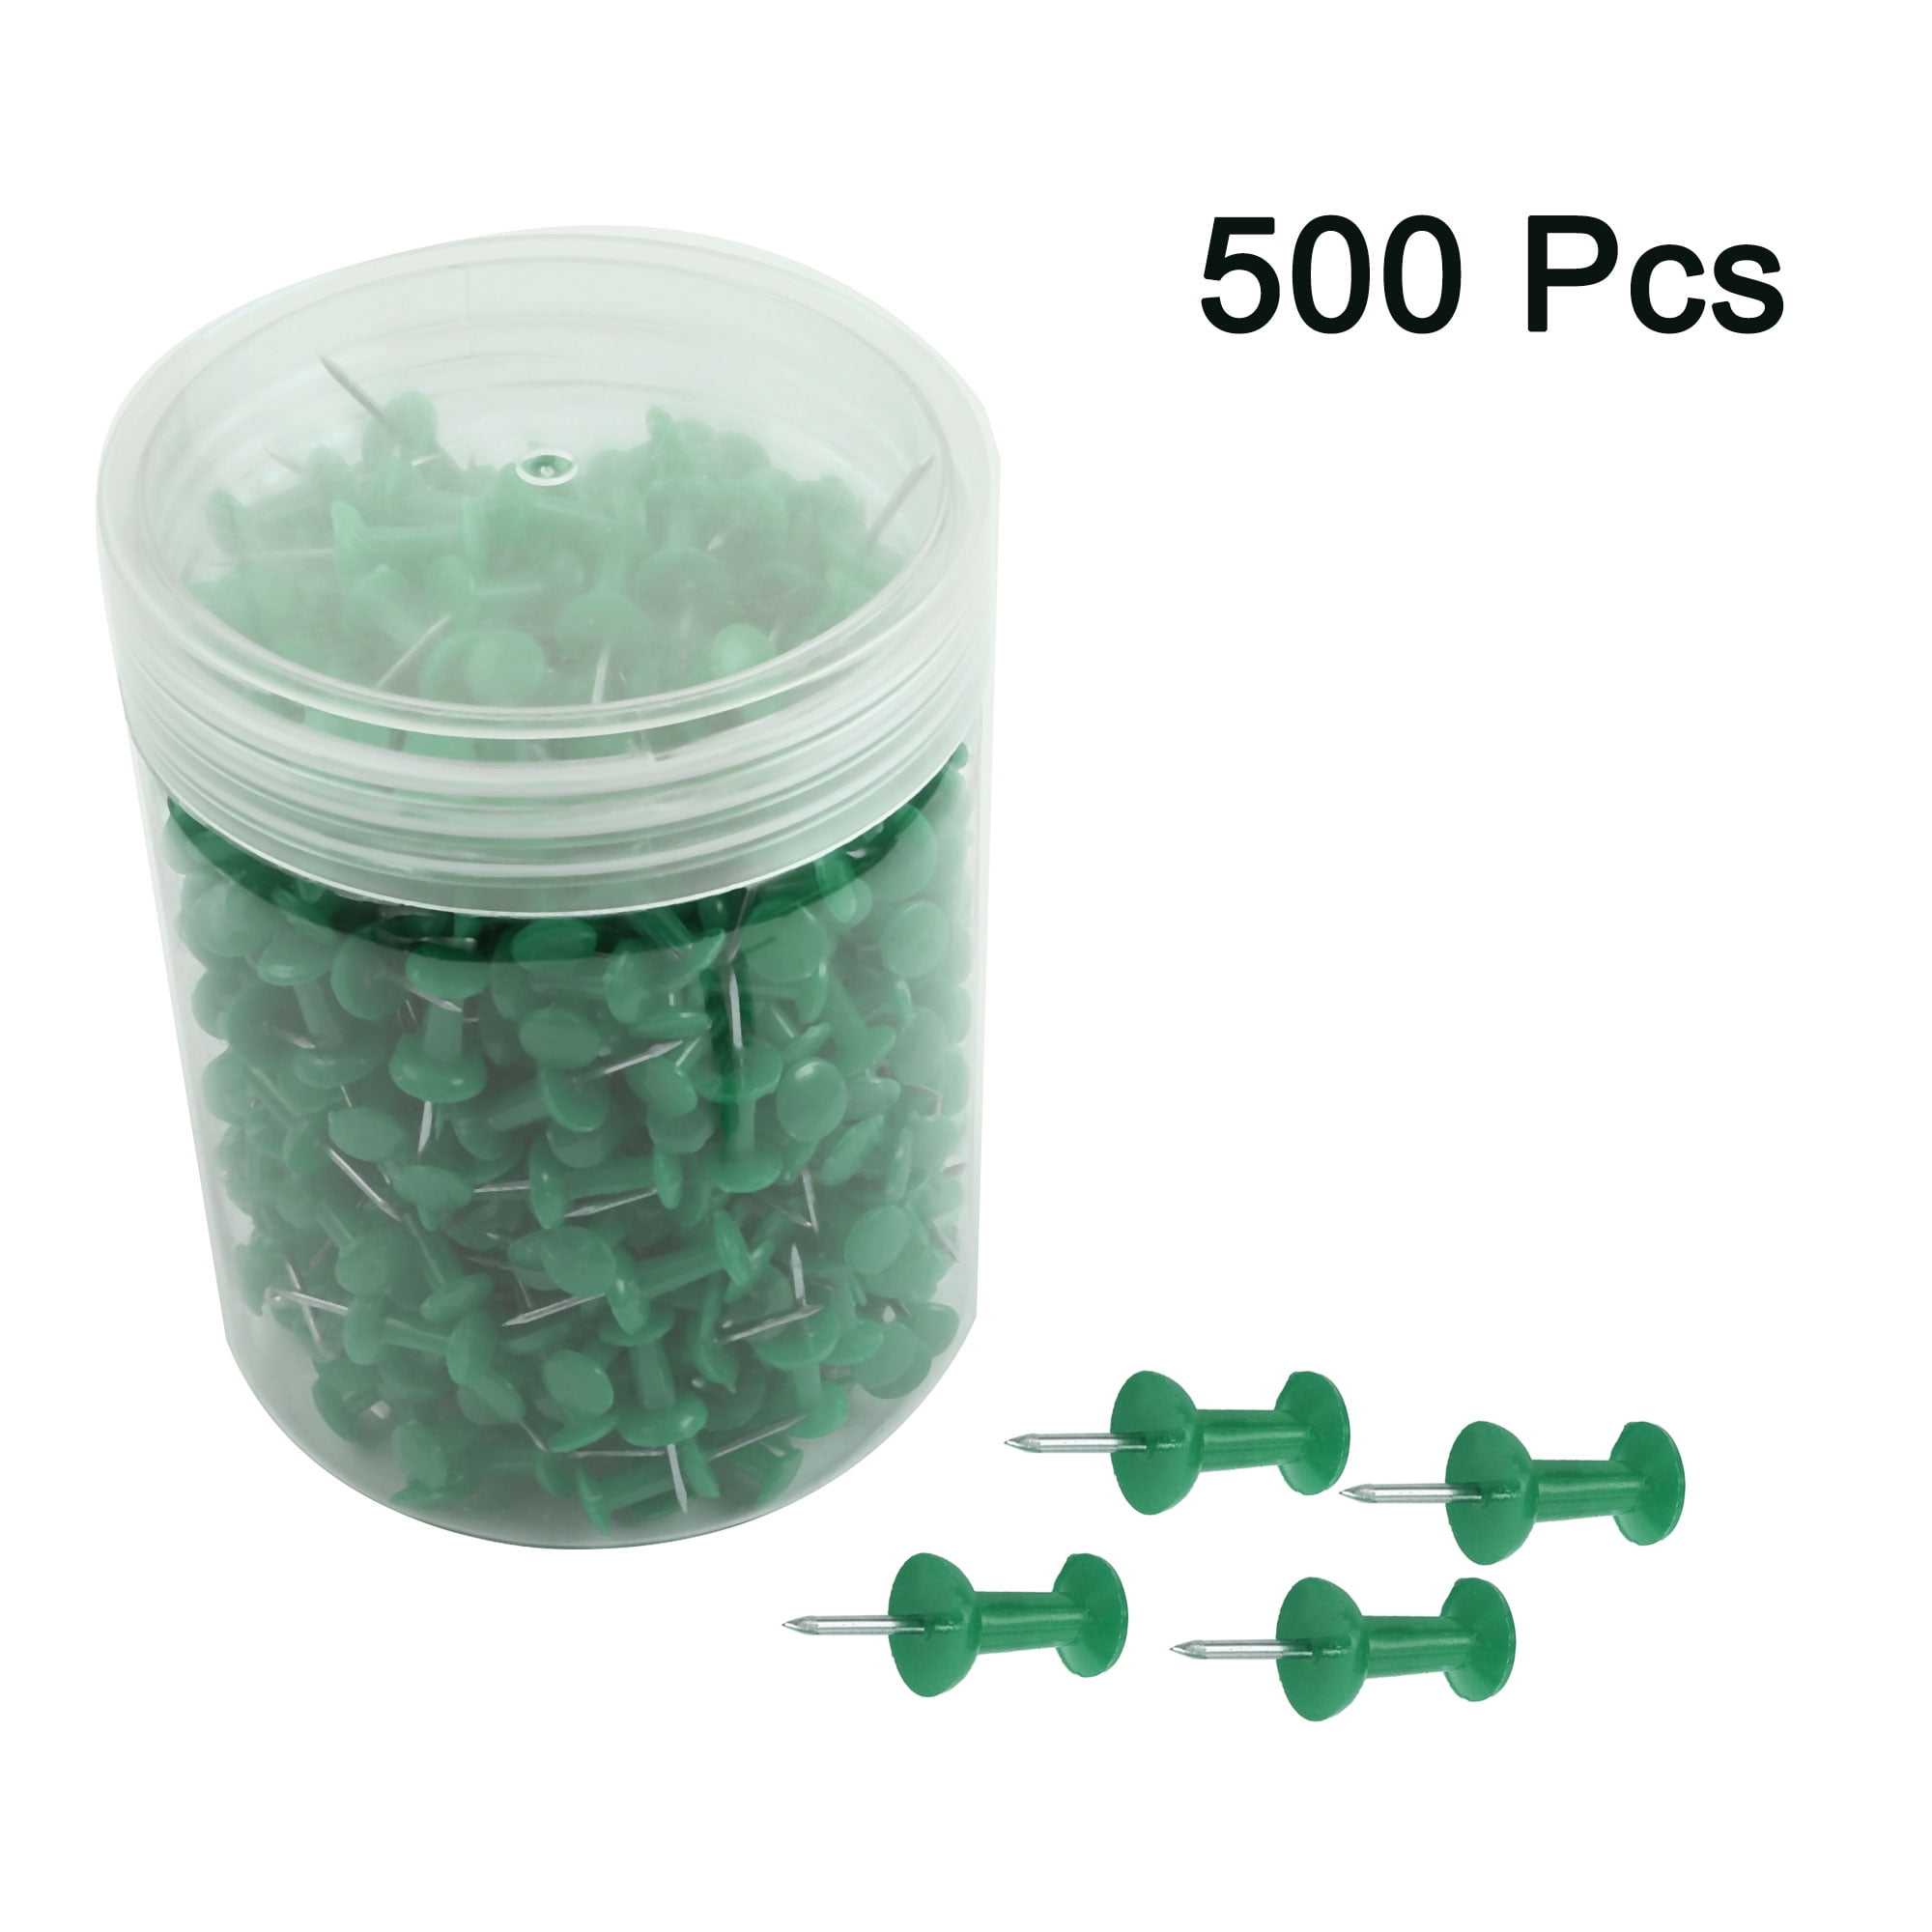 500 Pcs 3/8 Inch Push Pins  Thumb Tacks Office Cork Boards Map Note Picture Hanging Green